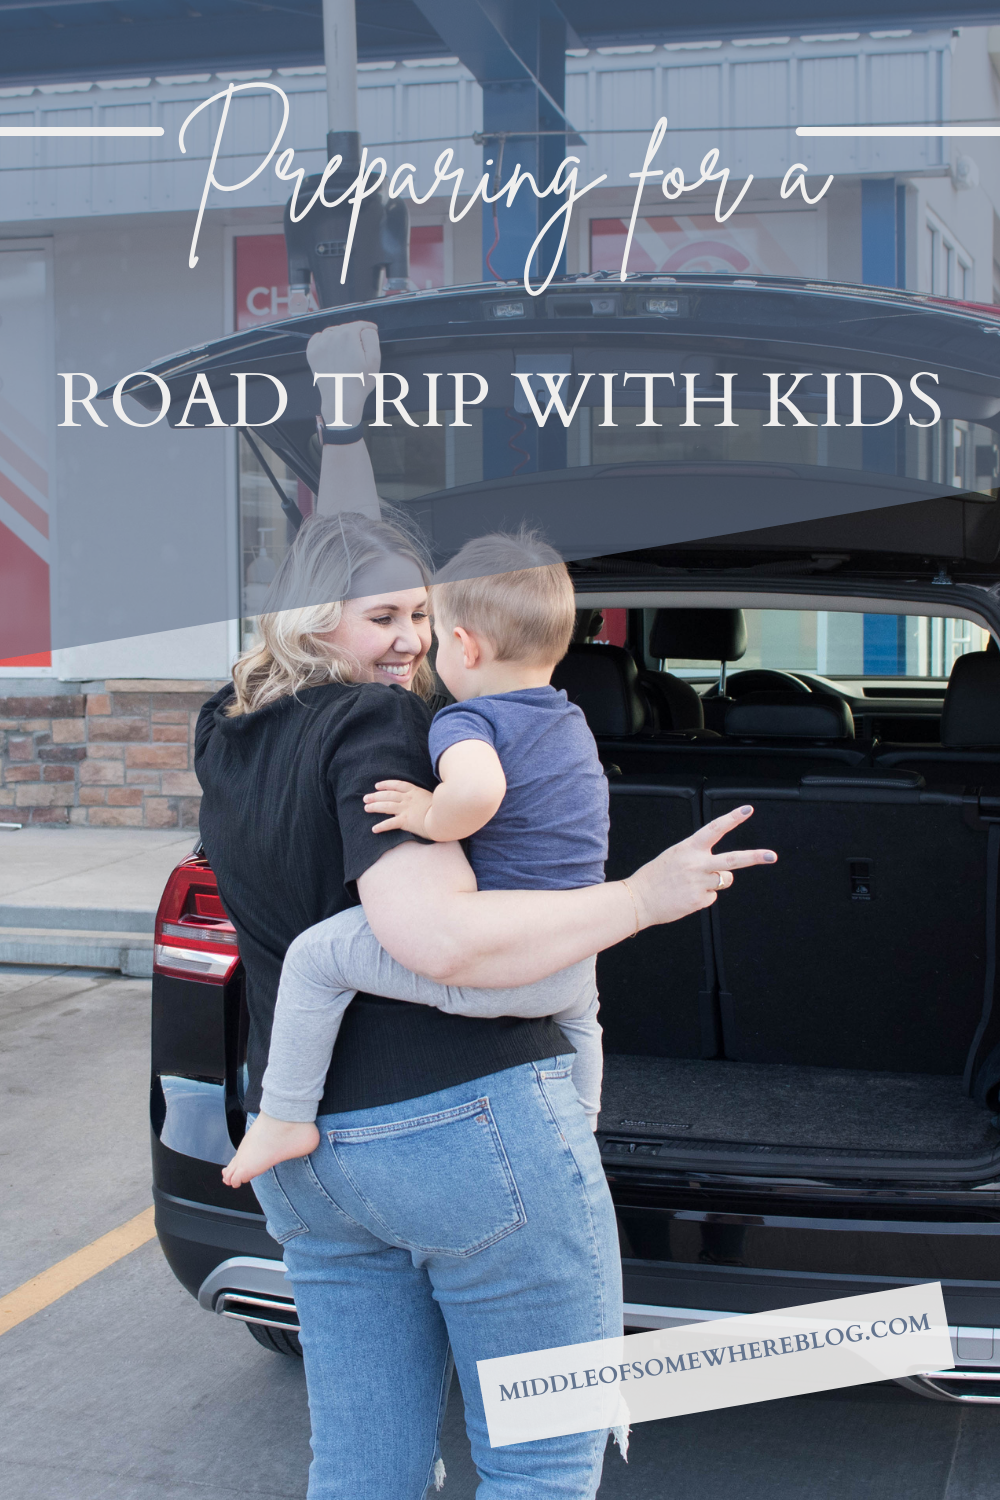 preparing for a road trip with kids champion Xpress car wash #carwash #roadtrip #travelingwithkids